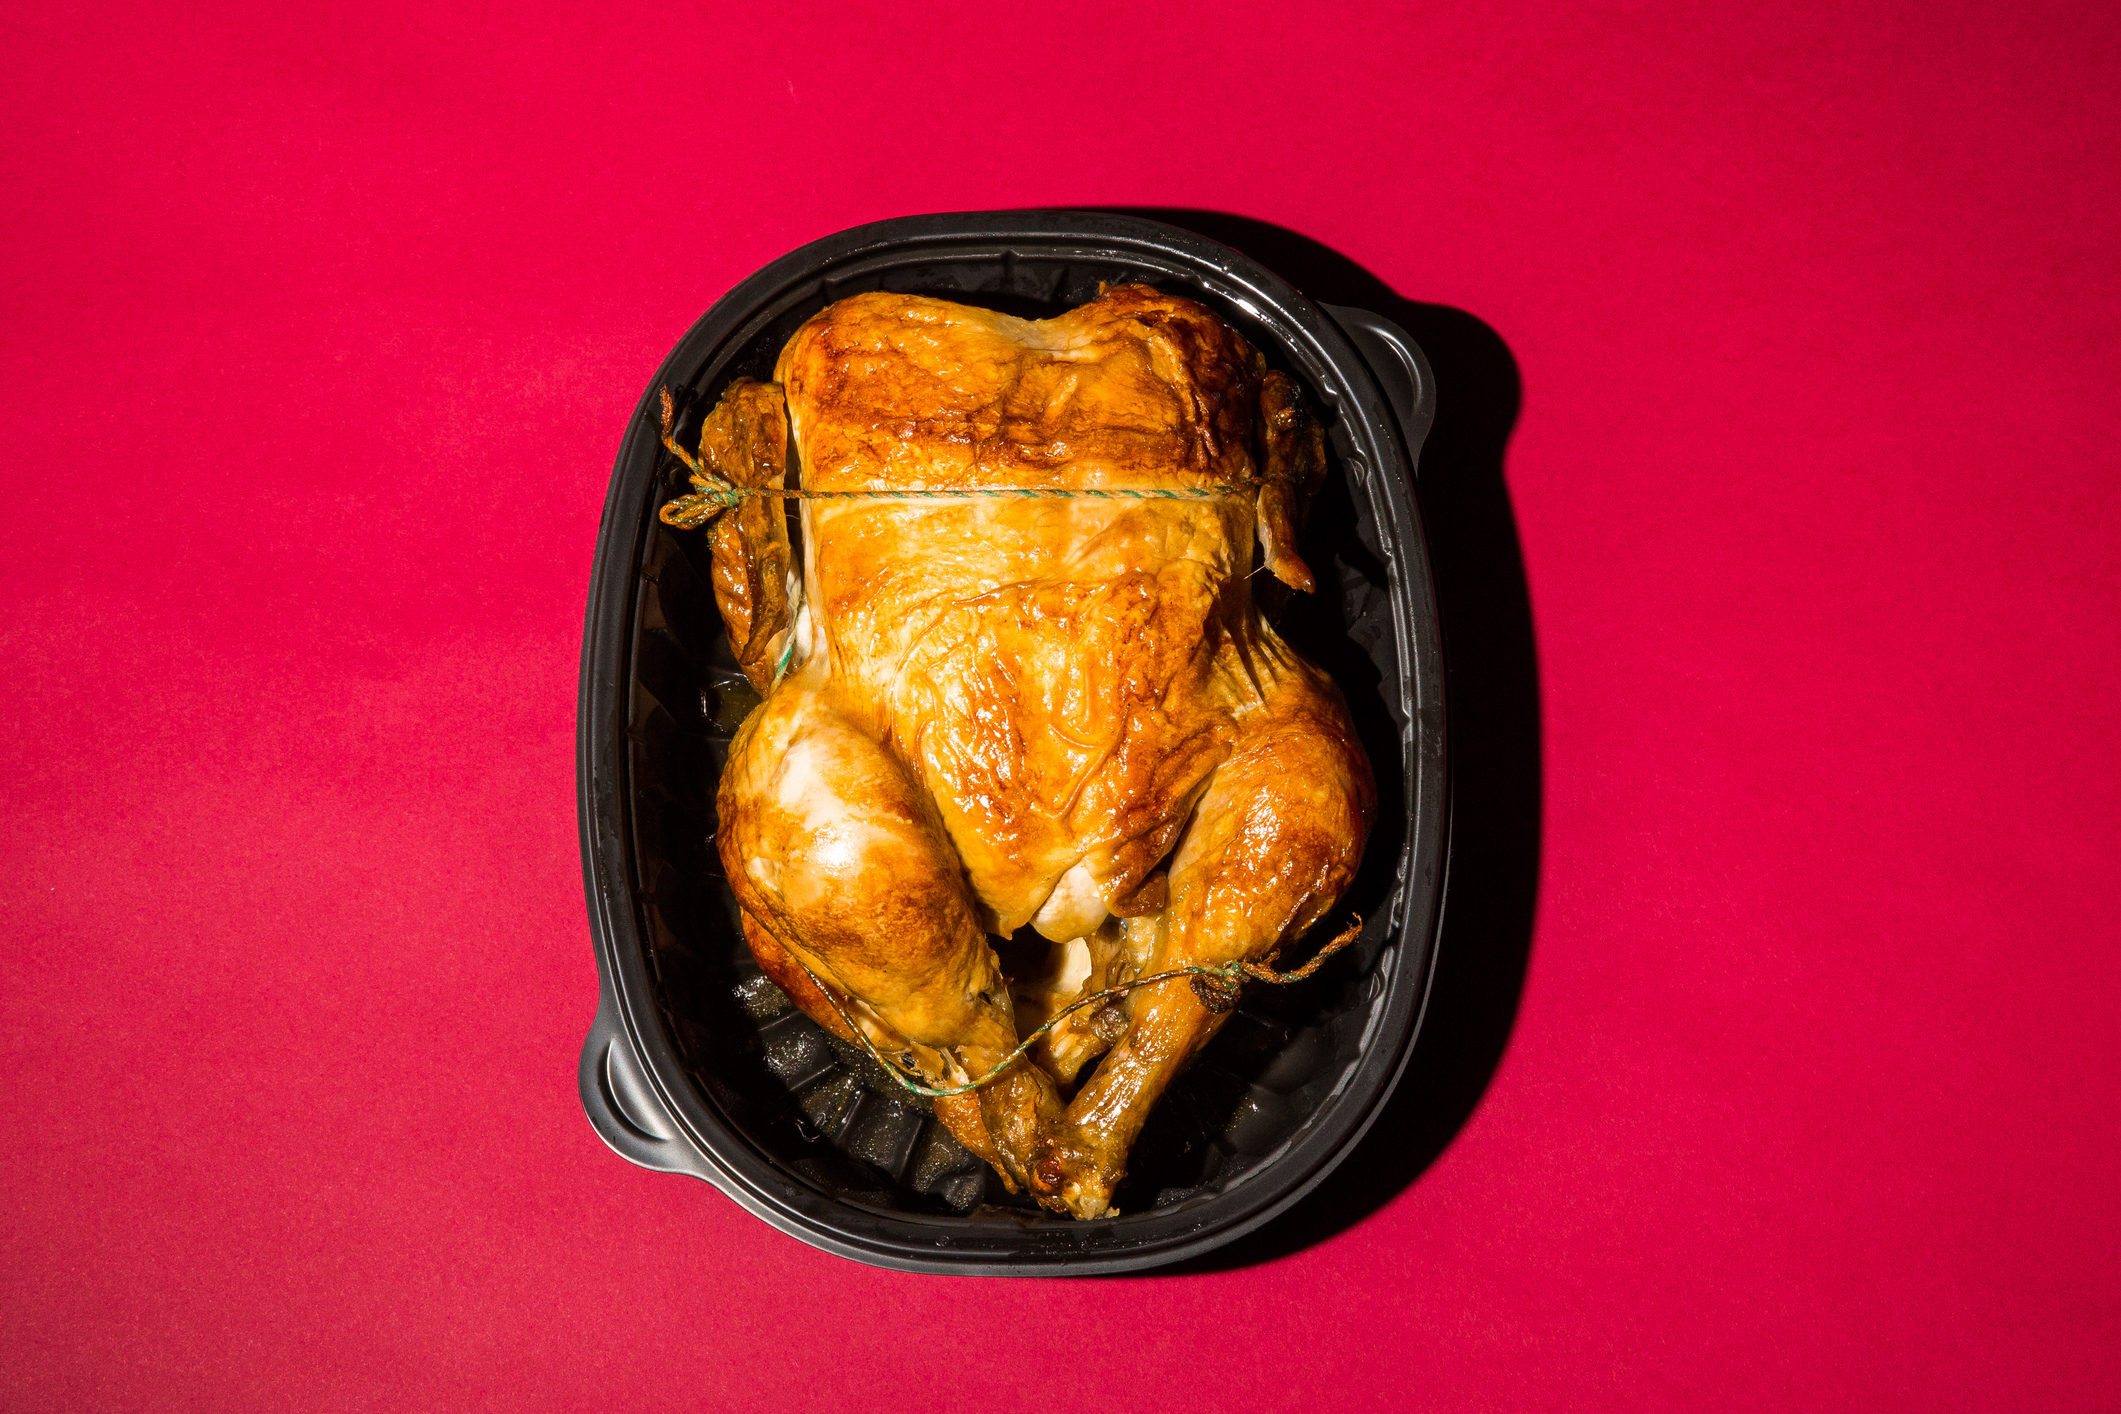 A rotisserie chicken in a black plastic container, set against a plain background